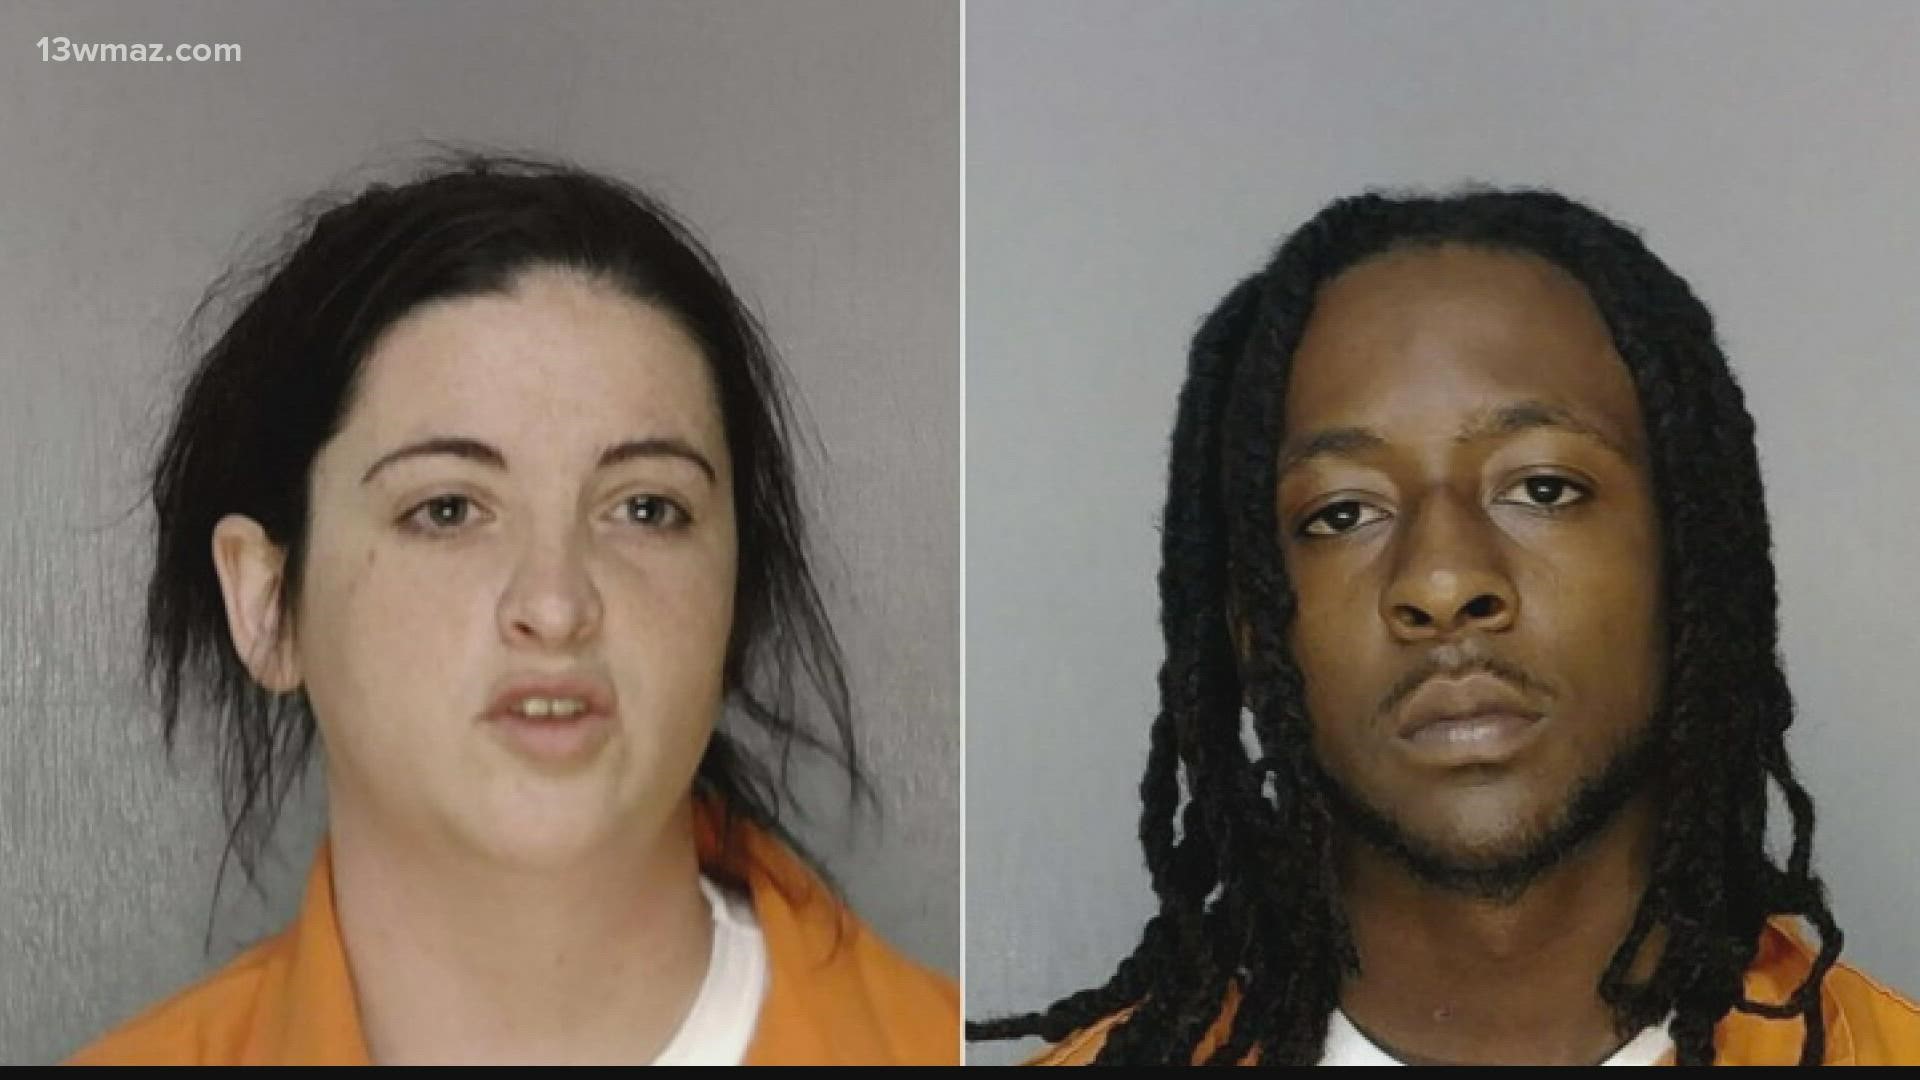 The infant’s mother, 29-year-old Amanda Hulsey, went to Atlanta to be with her son while her boyfriend, 22-year-old Tyrek Dixon, was interviewed by investigators